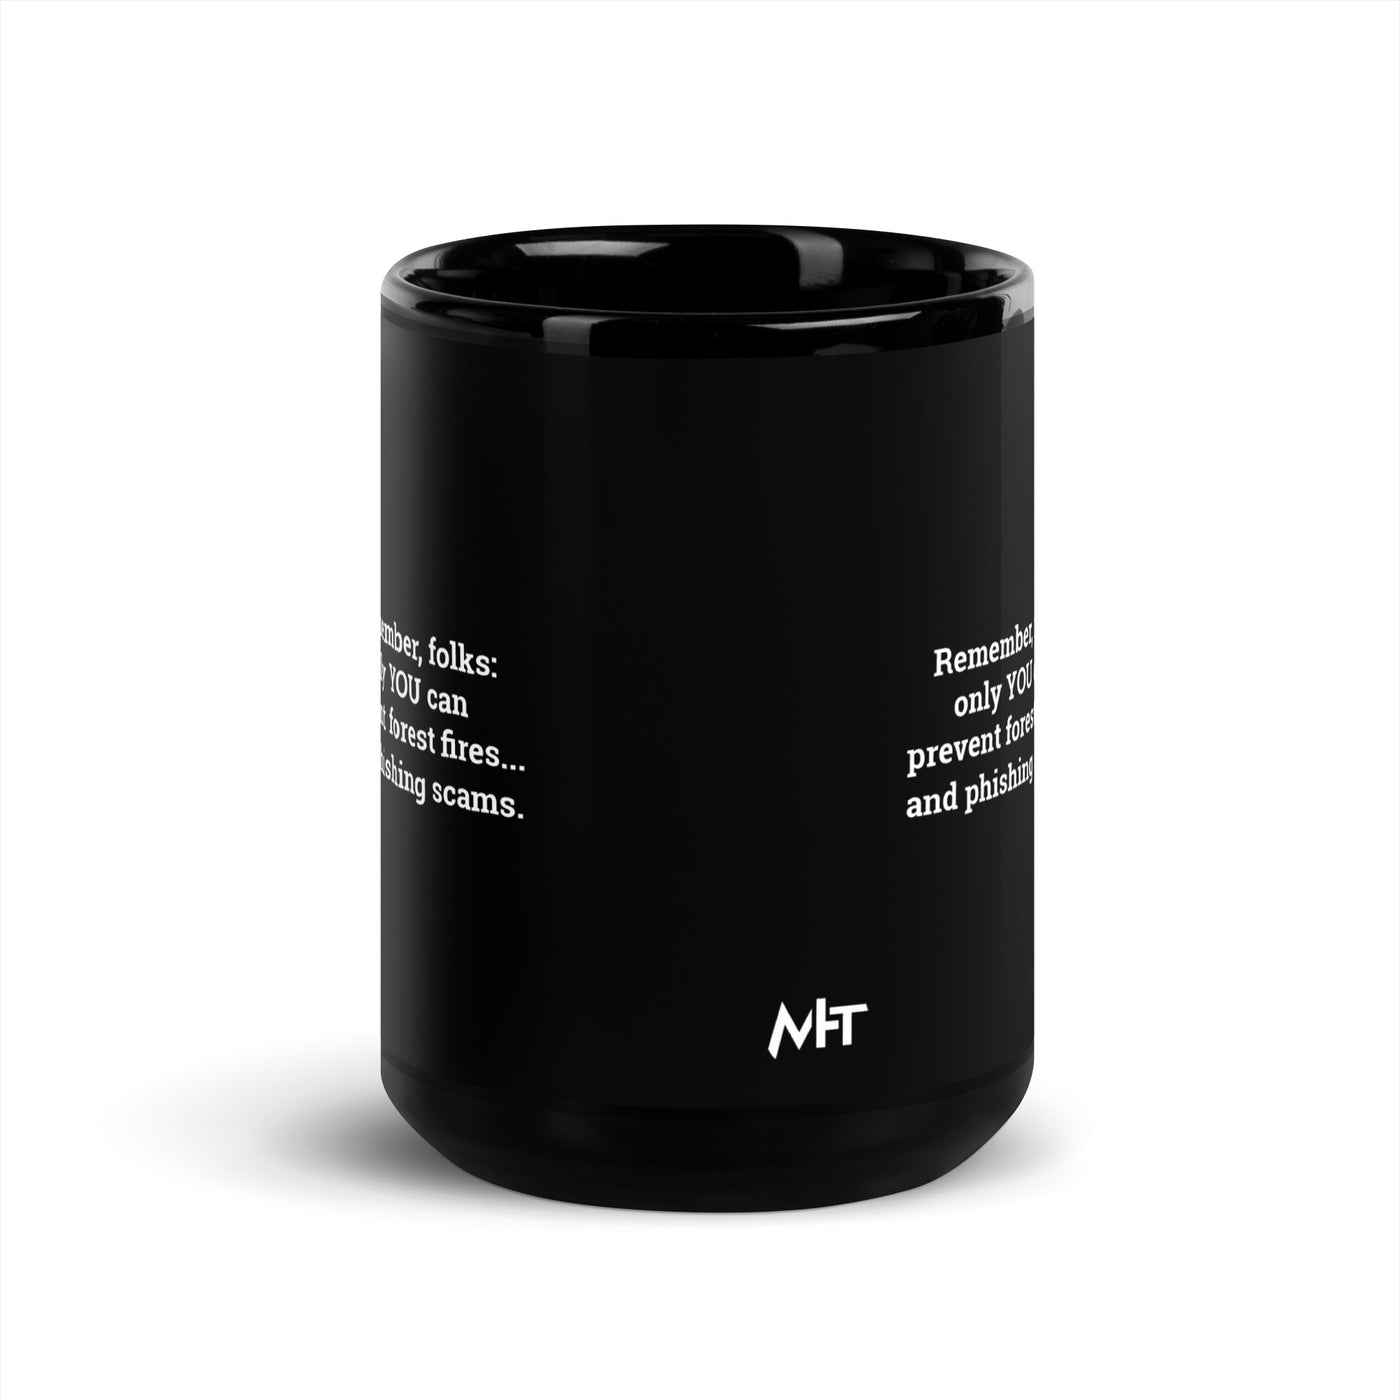 Remember folks only YOU can prevent forest fires and phishing scams V2 - Black Glossy Mug